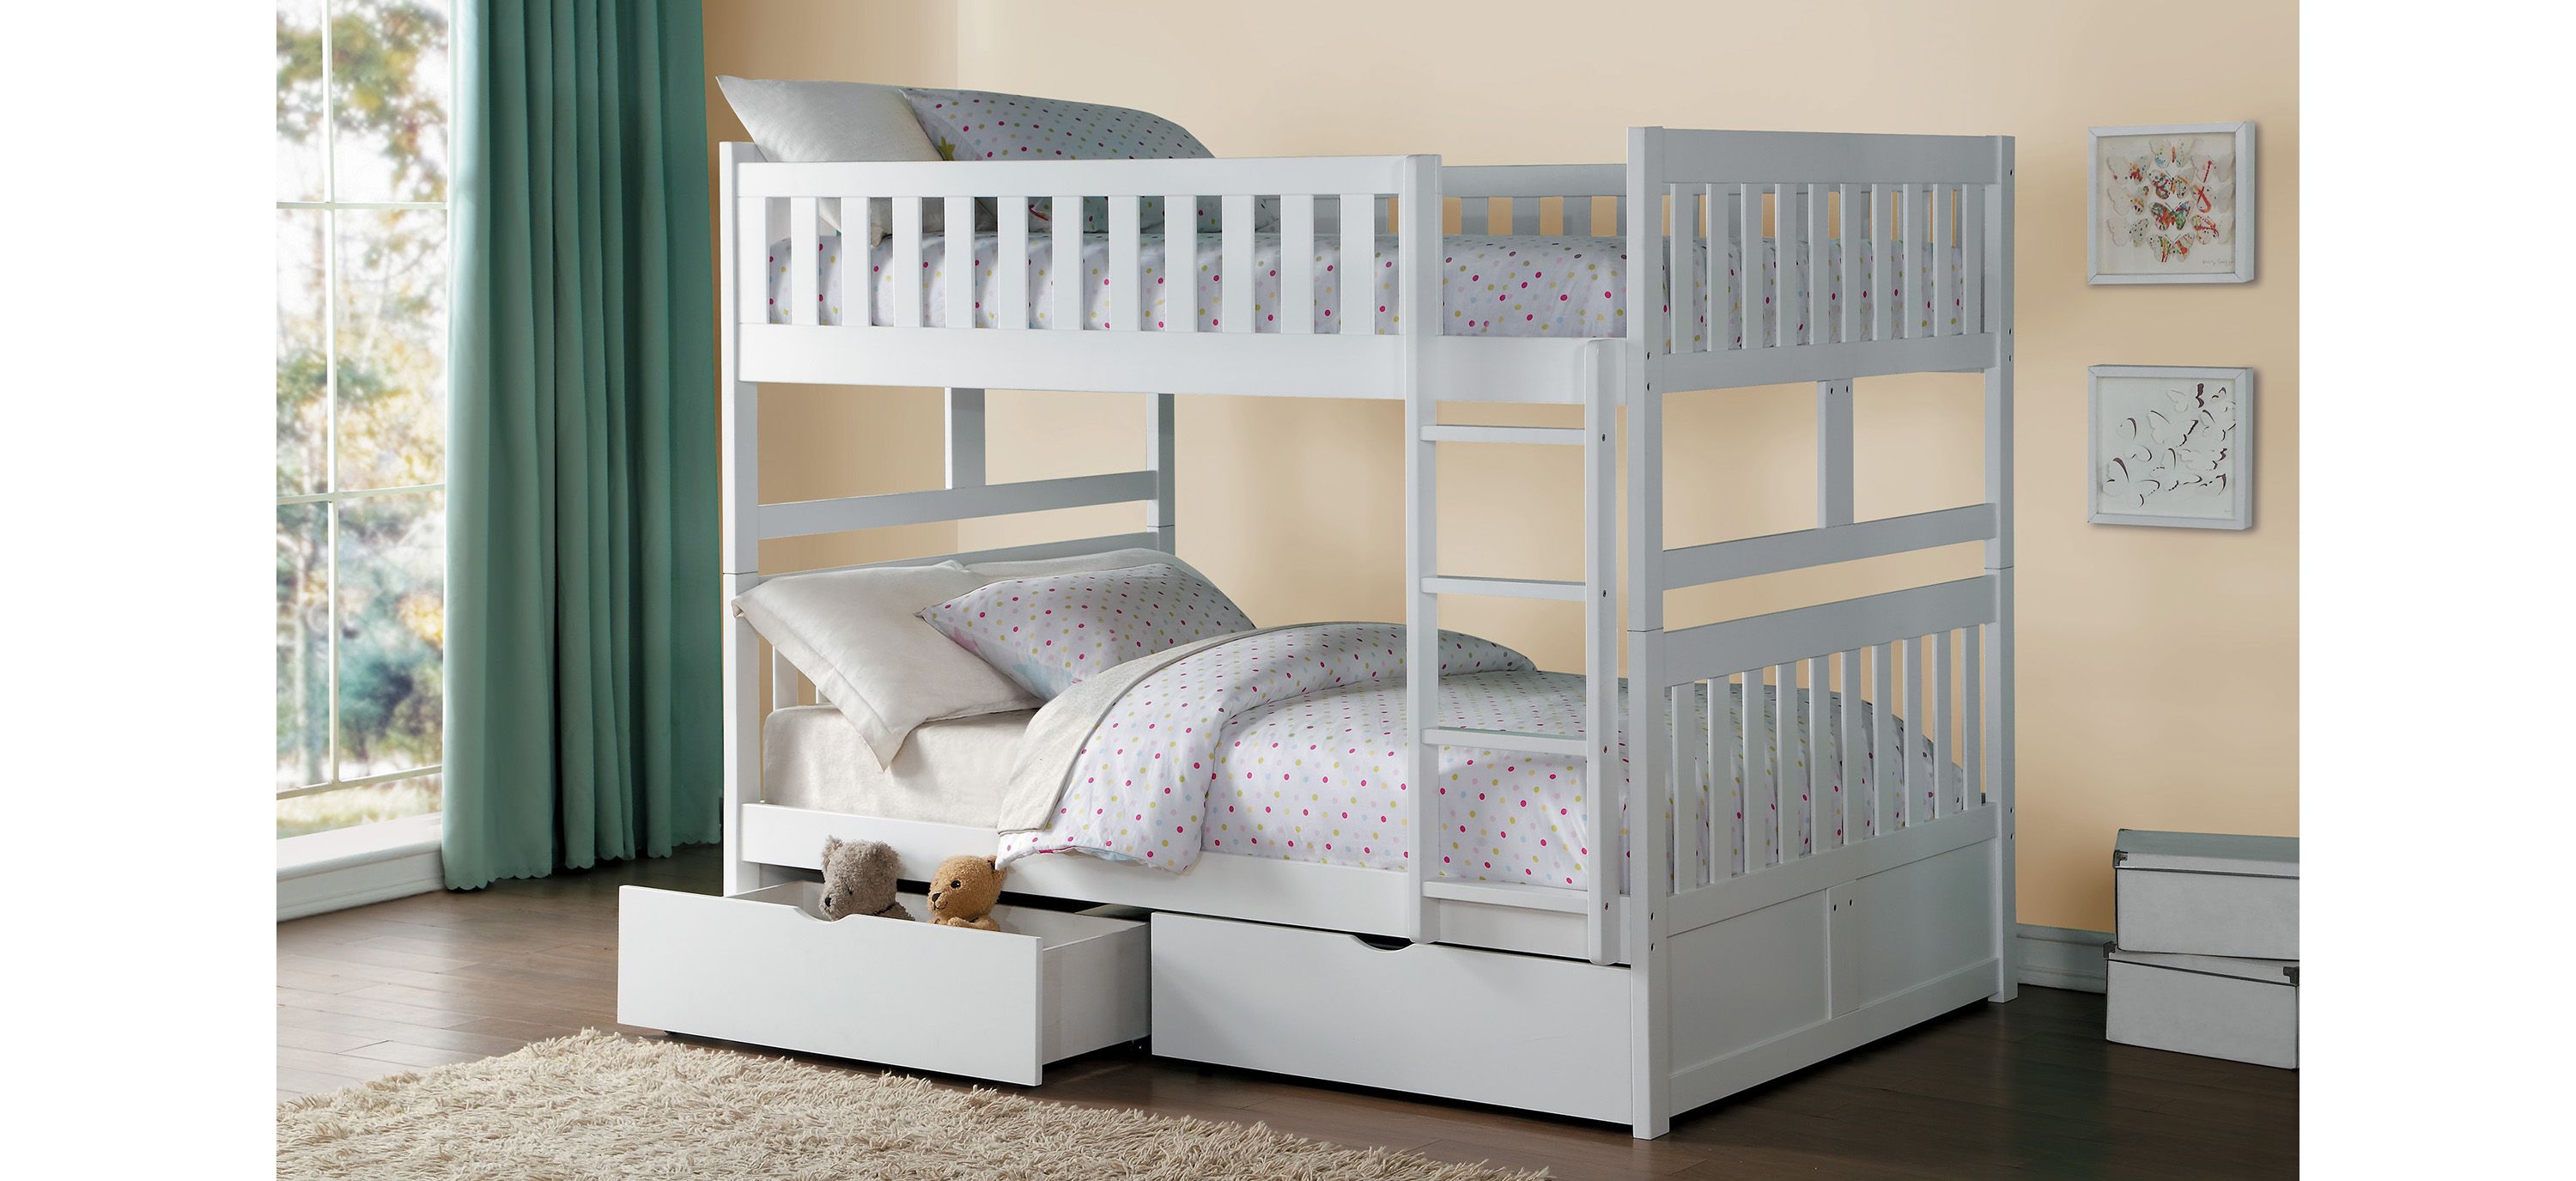 Carissa Bunk Bed with Storage